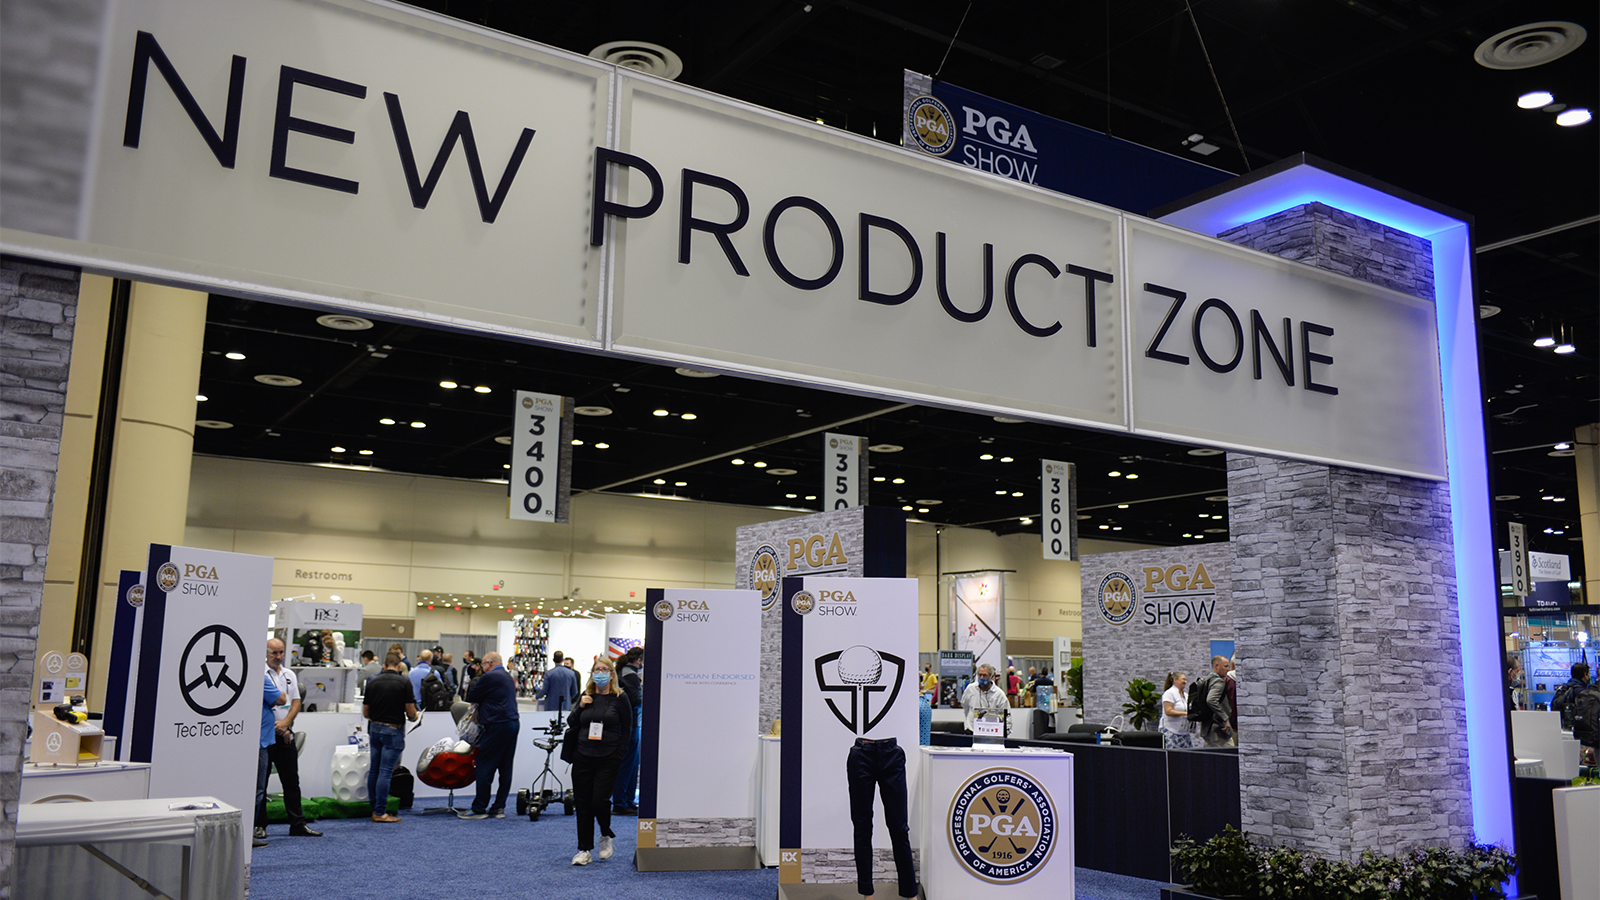 The New Product Zone during the 2022 PGA Show at the Orange County Convention Center on January 26, 2022 in Orlando, Florida. (Photo by Montana Pritchard/PGA of America)